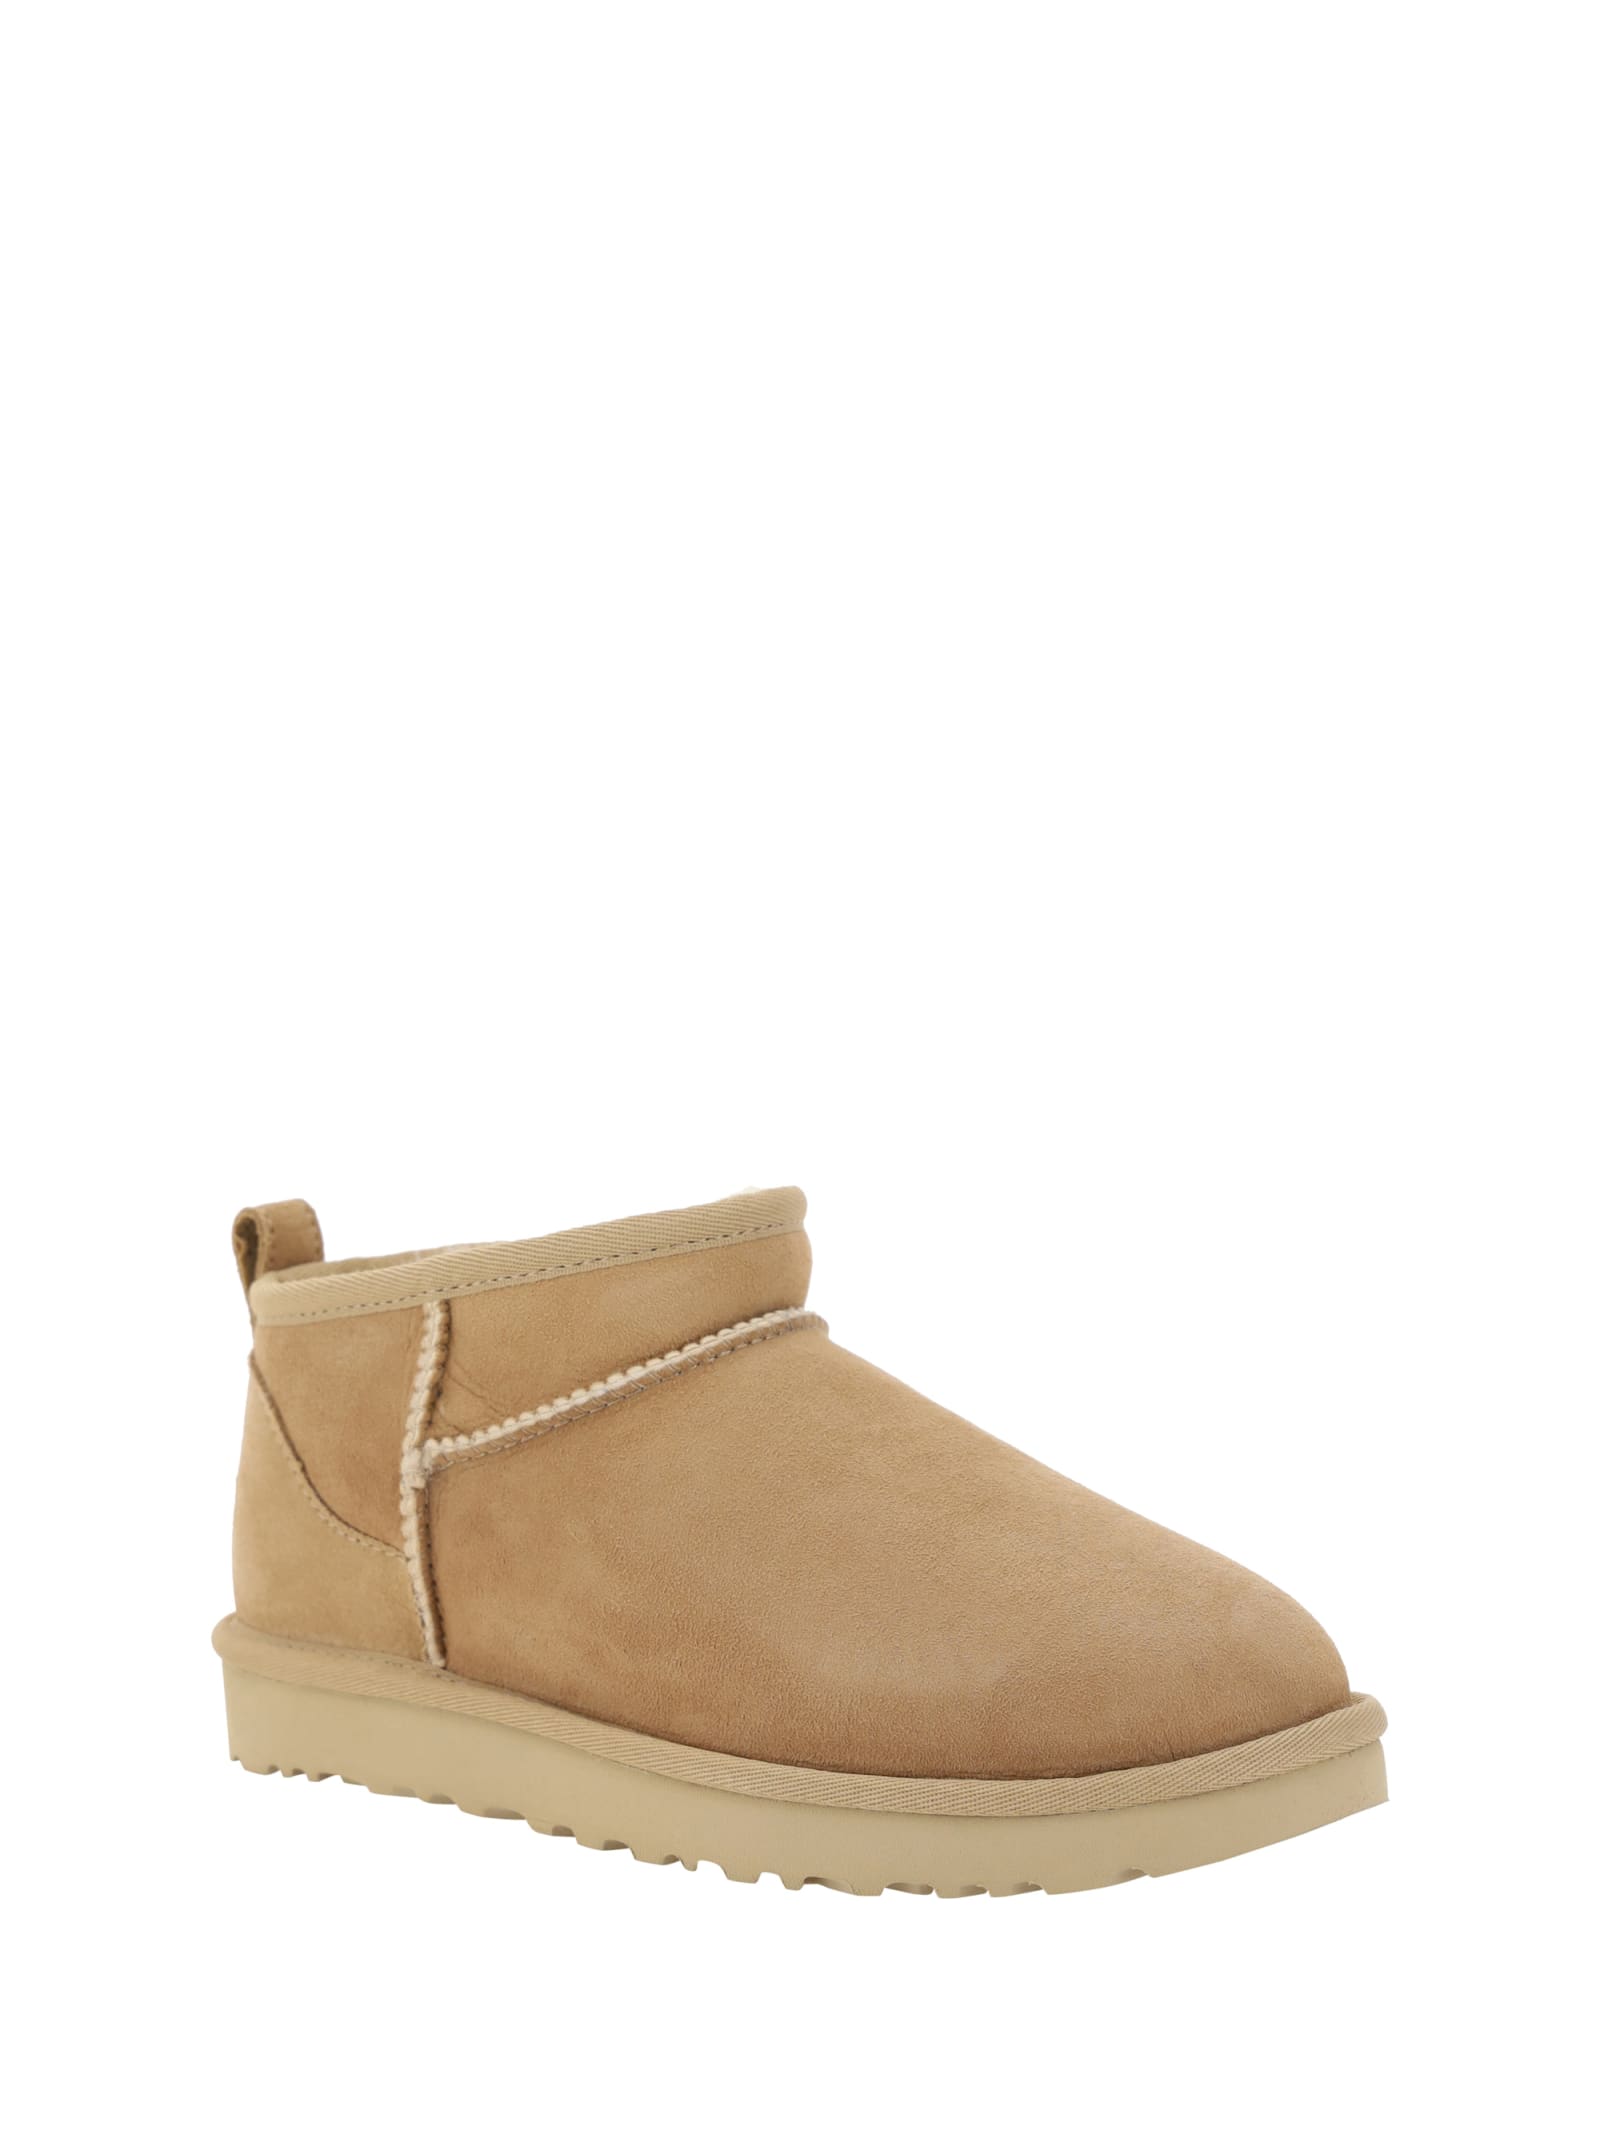 Shop Ugg Ultra Mini Boots In Sand